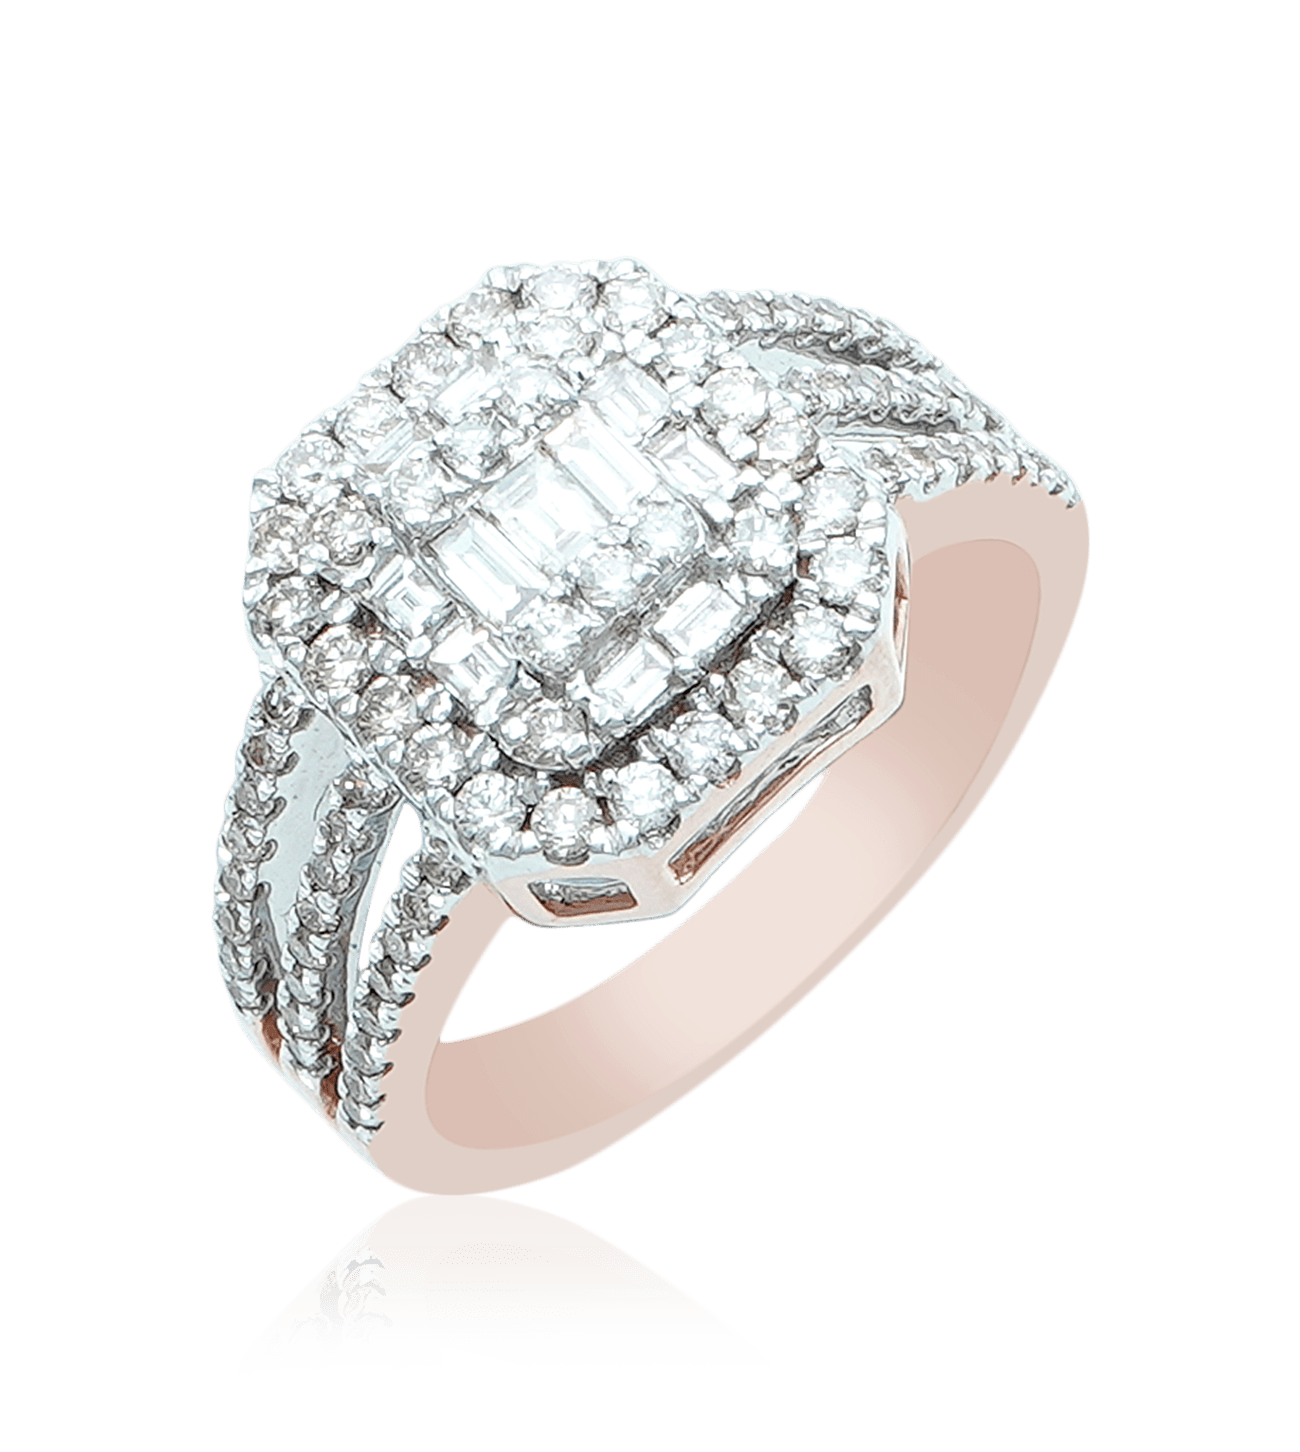 Diamond ring png images | PNGEgg